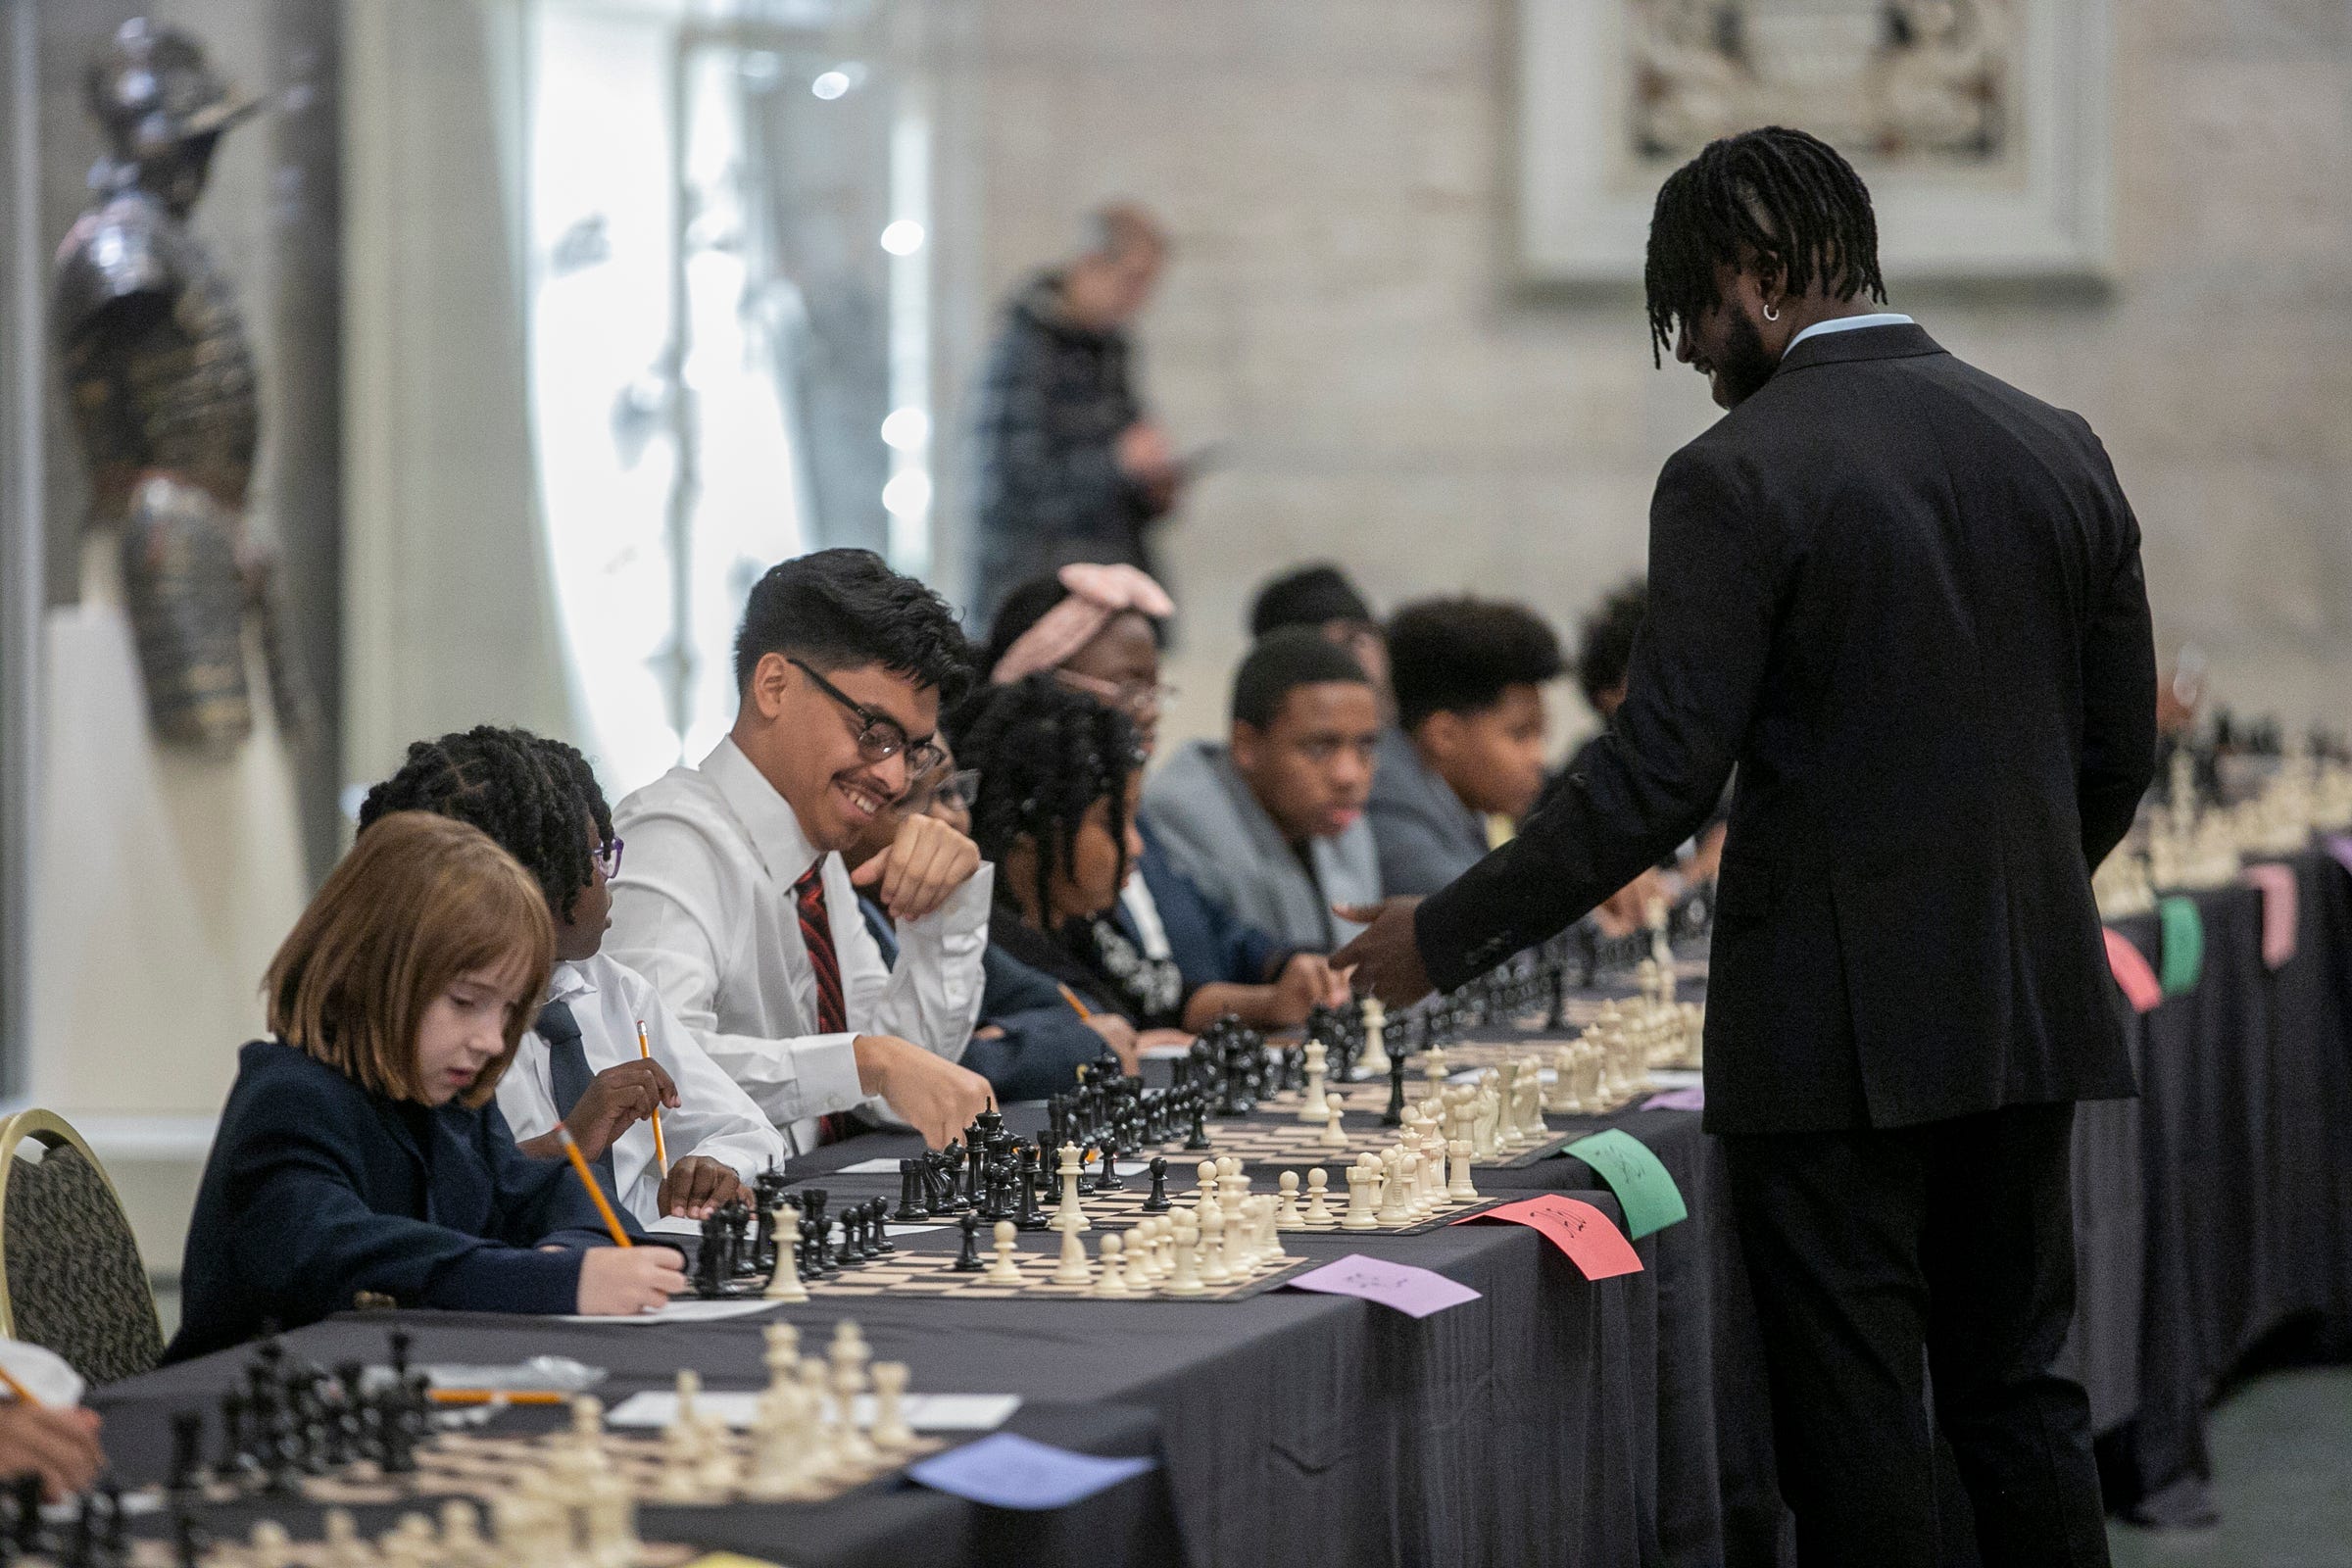 Two generations inspire law student's quest to be first Black U.S. woman chess  master